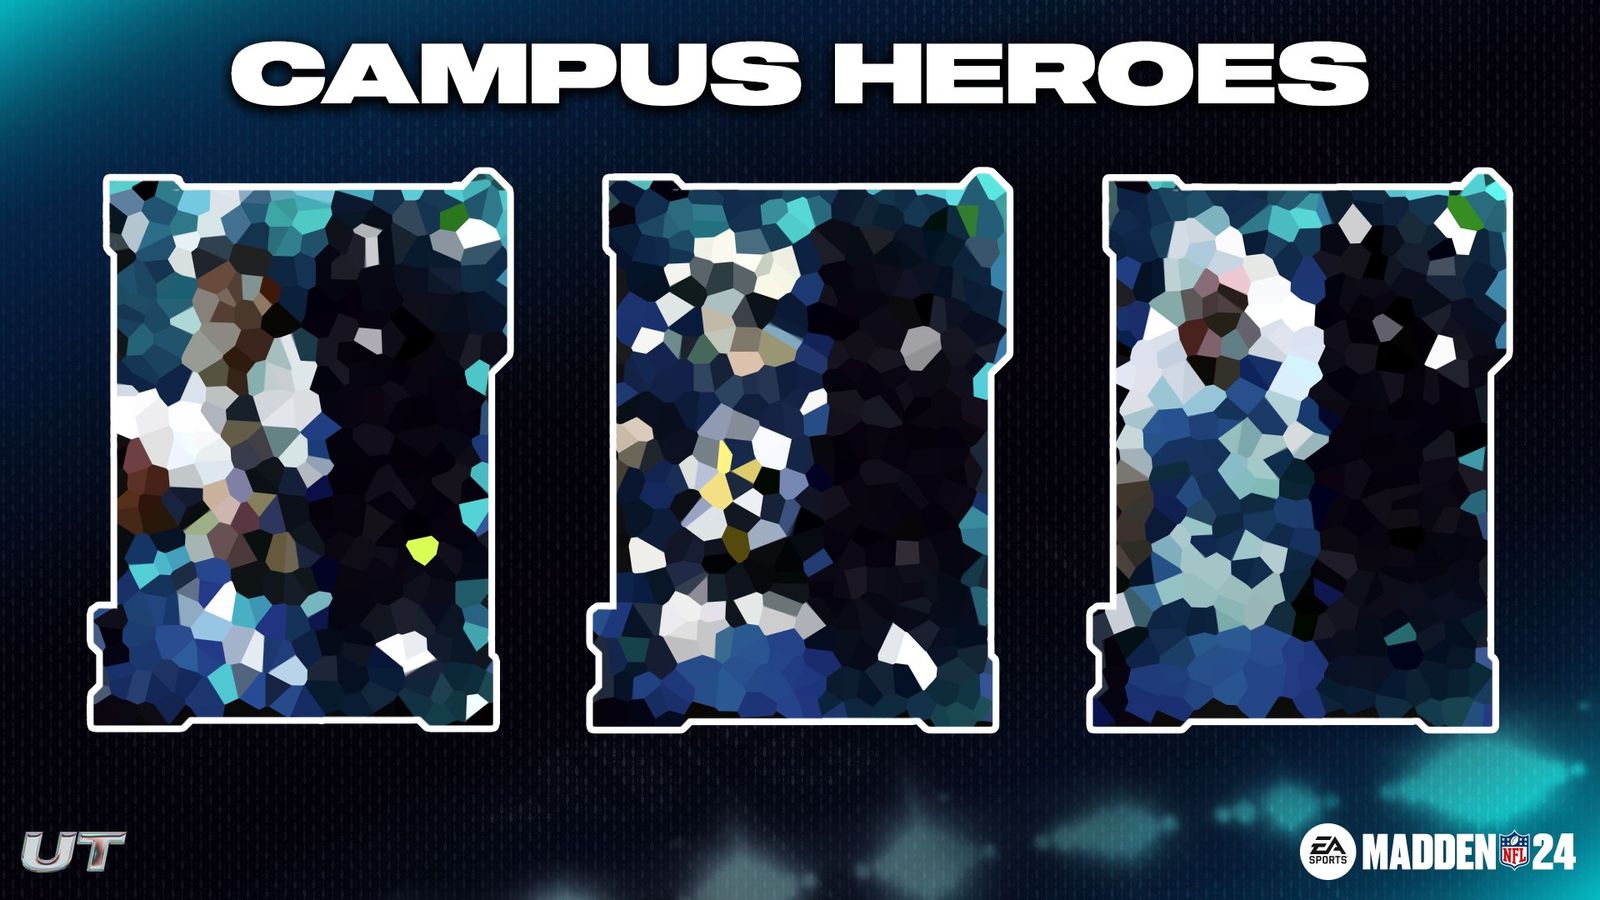 Madden 24 Campus Heroes